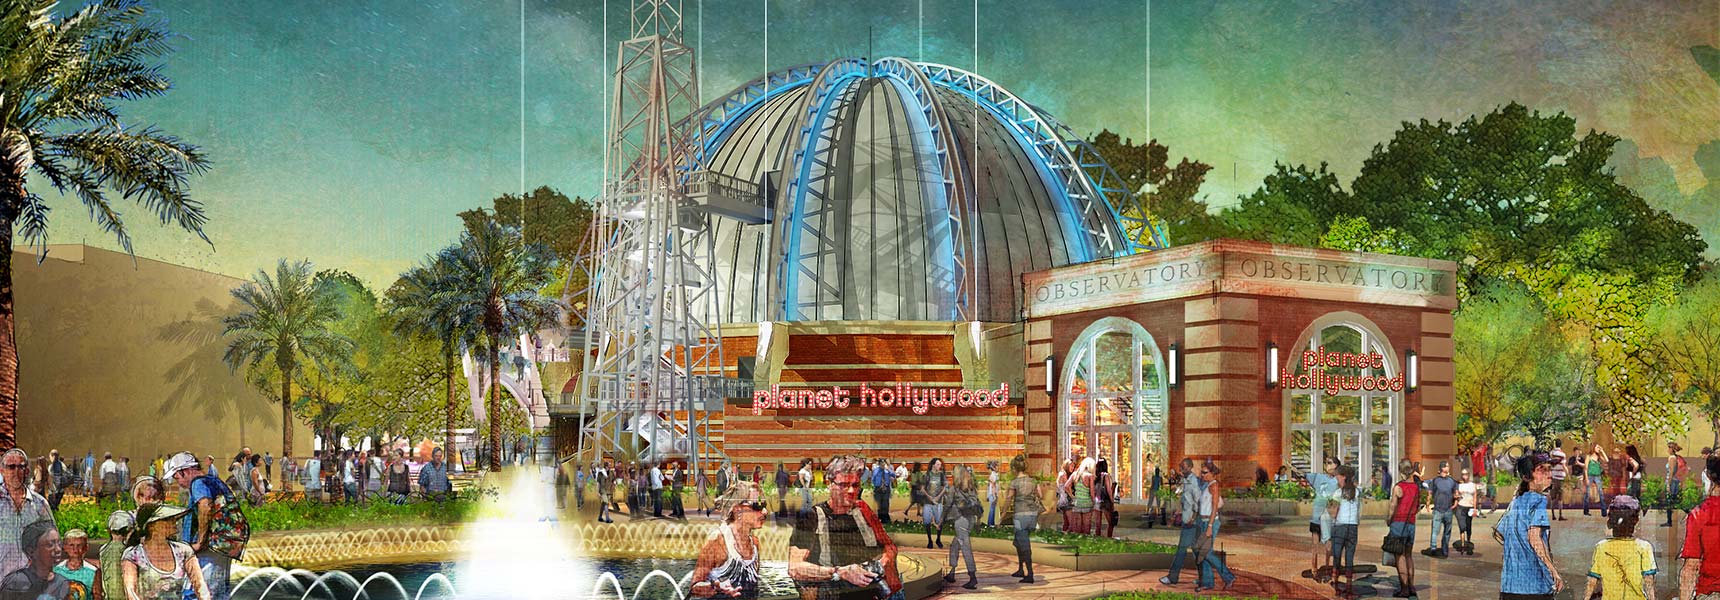 Planet Hollywood in Disney Springs is now hiring full and part time employees